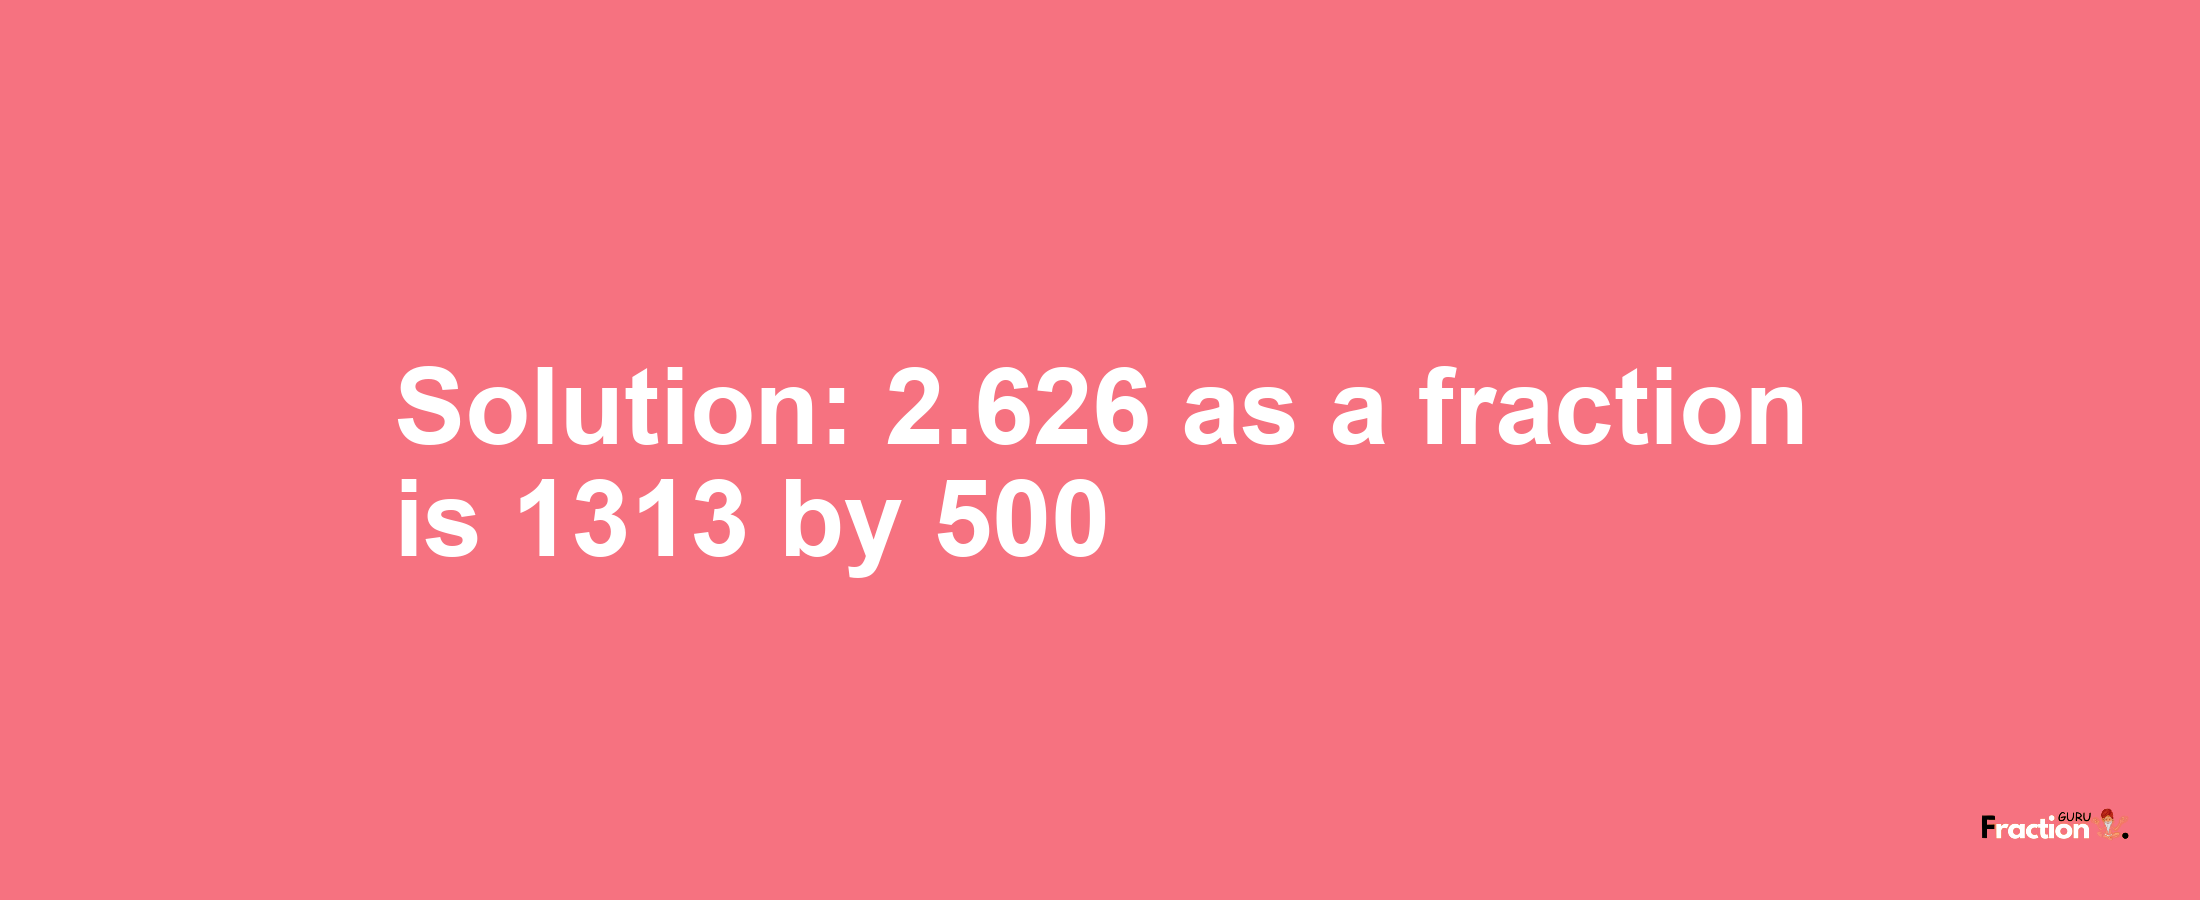 Solution:2.626 as a fraction is 1313/500